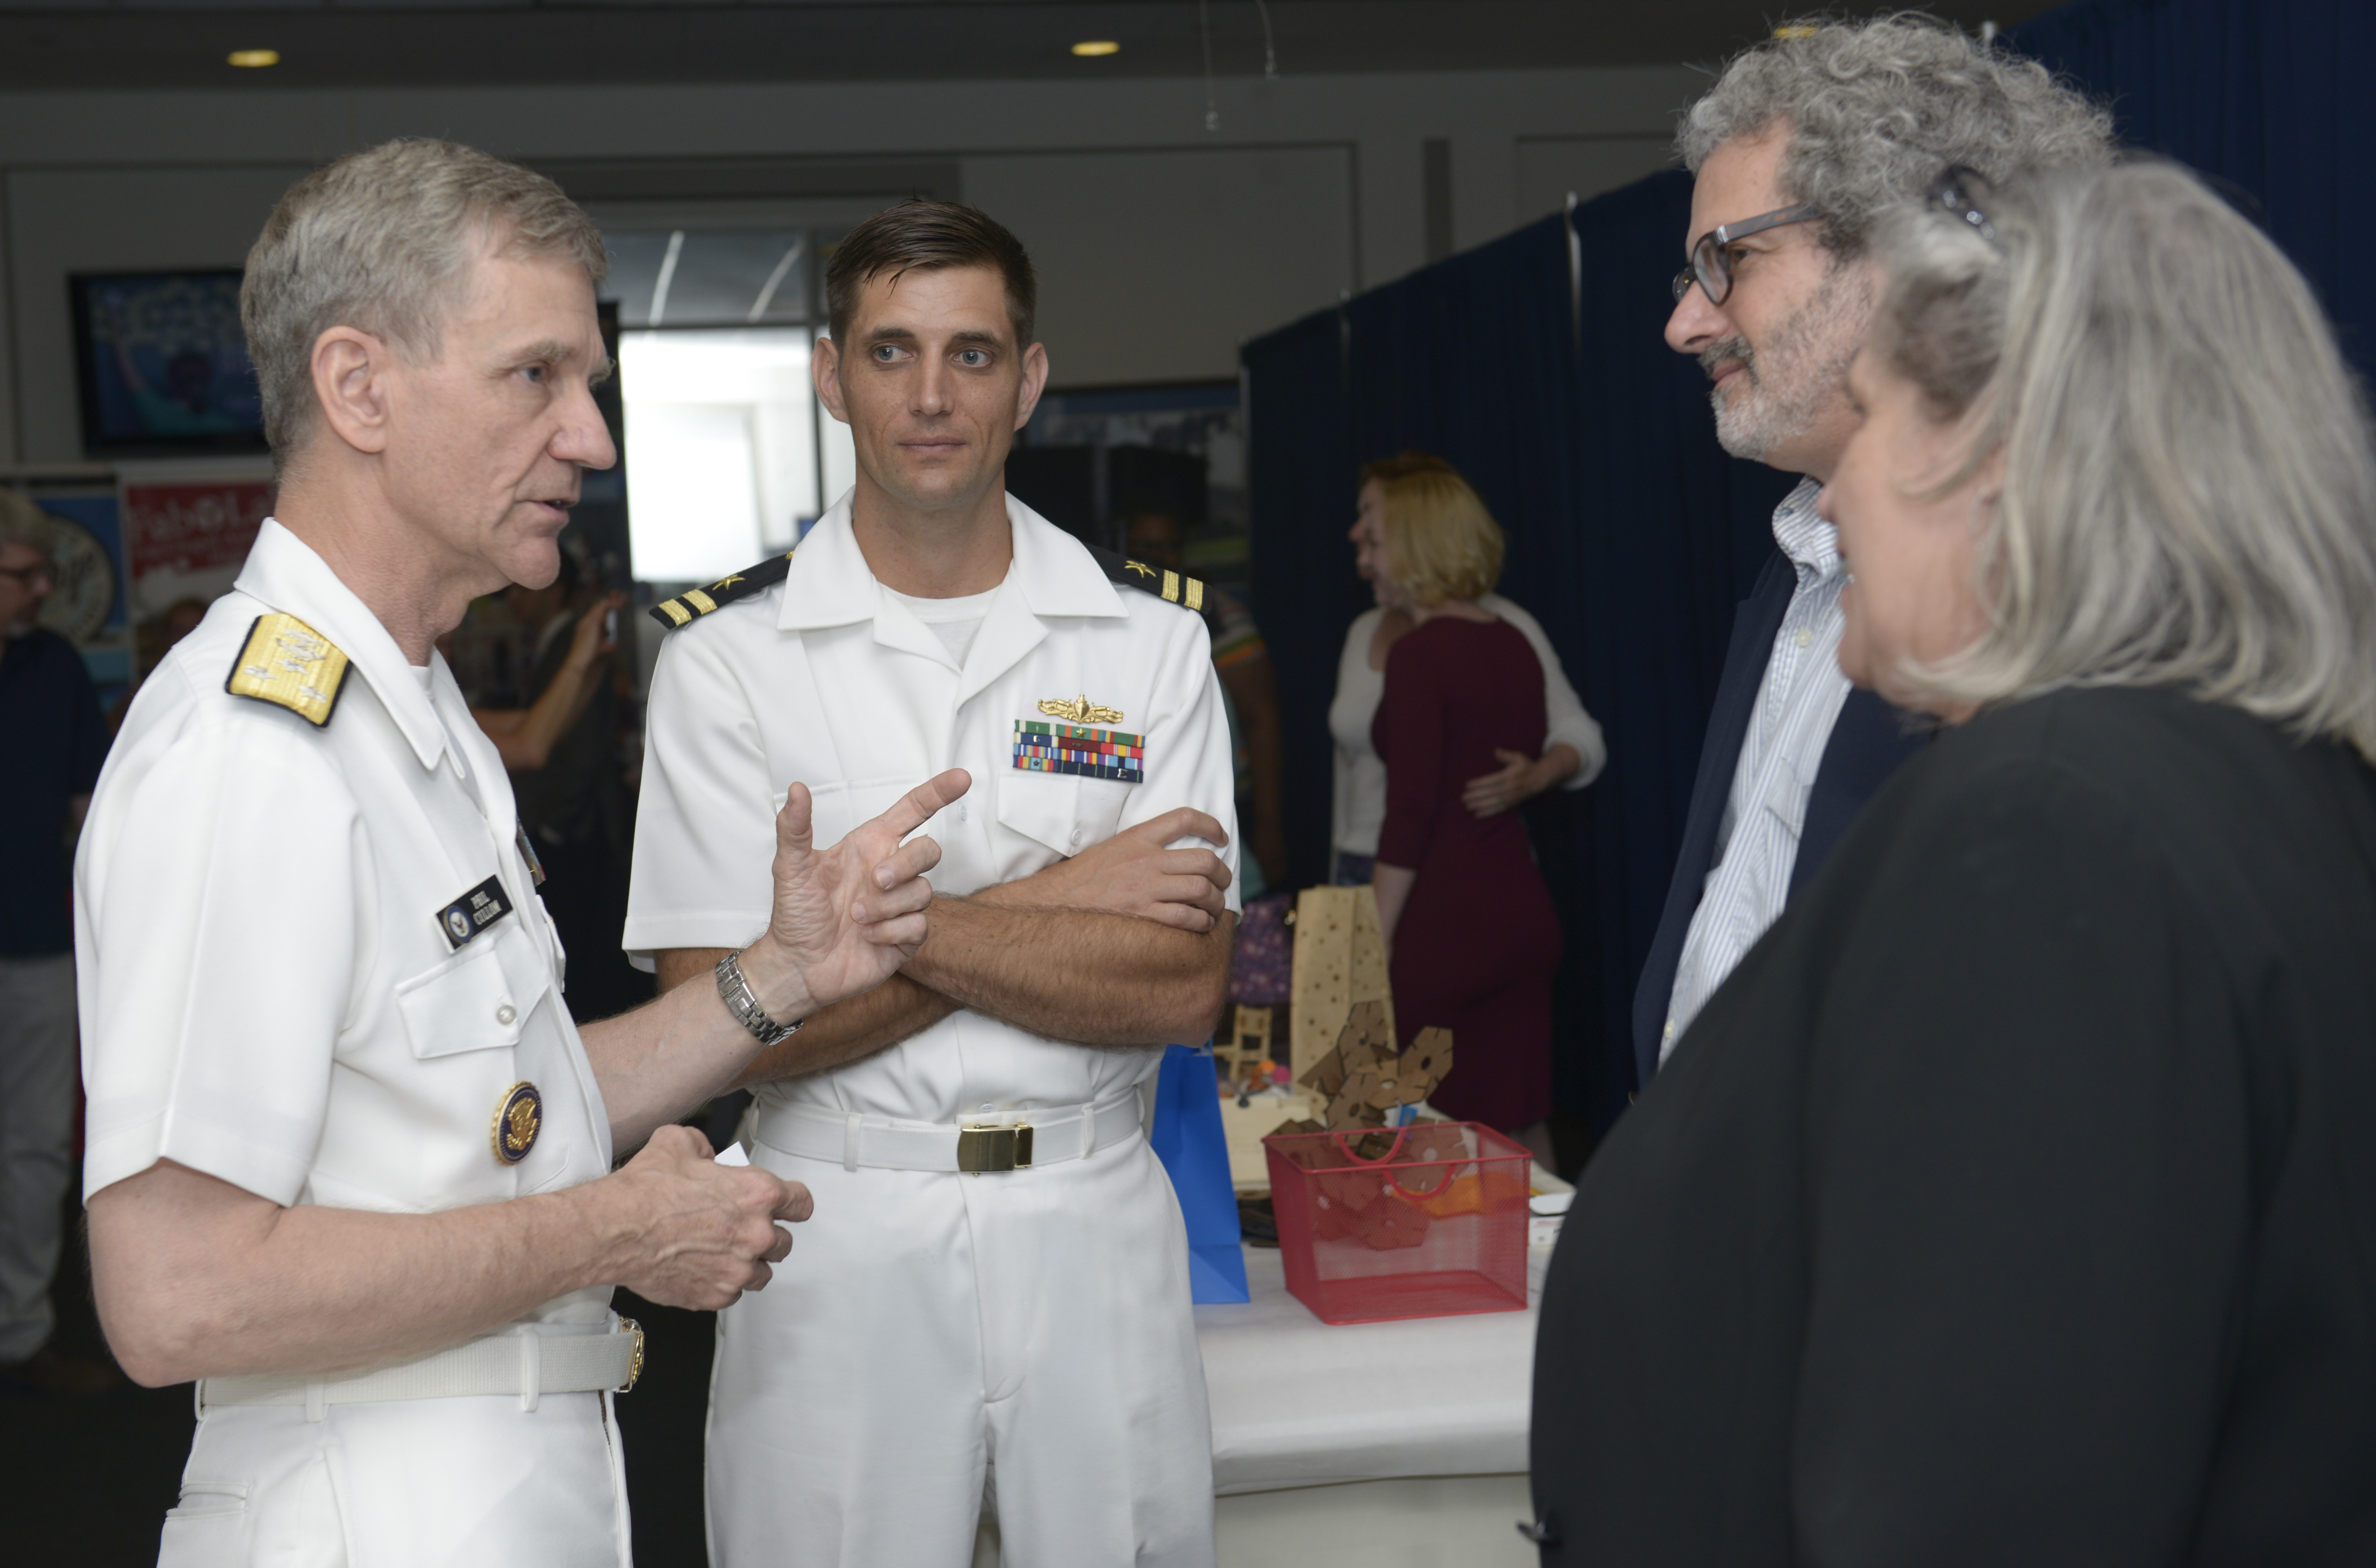 160621-N-YO707-178 Washington, D.C. (June 21, 2016) U.S. Navy Vice Adm. Philip Cullom, deputy CNO for fleet readiness and logistics, speaks with Prof. Neil Gershenfeld, second from right, director of MIT's Center for Bits and Atoms during the Capitol Hill Maker Faire in Washington, D.C., June 21, 2016. The Faire showcased robotics, drones, 3D printing and printed art. (U.S. Navy photo by Mass Communication Specialist 2nd Class Cyrus Roson/ Released)